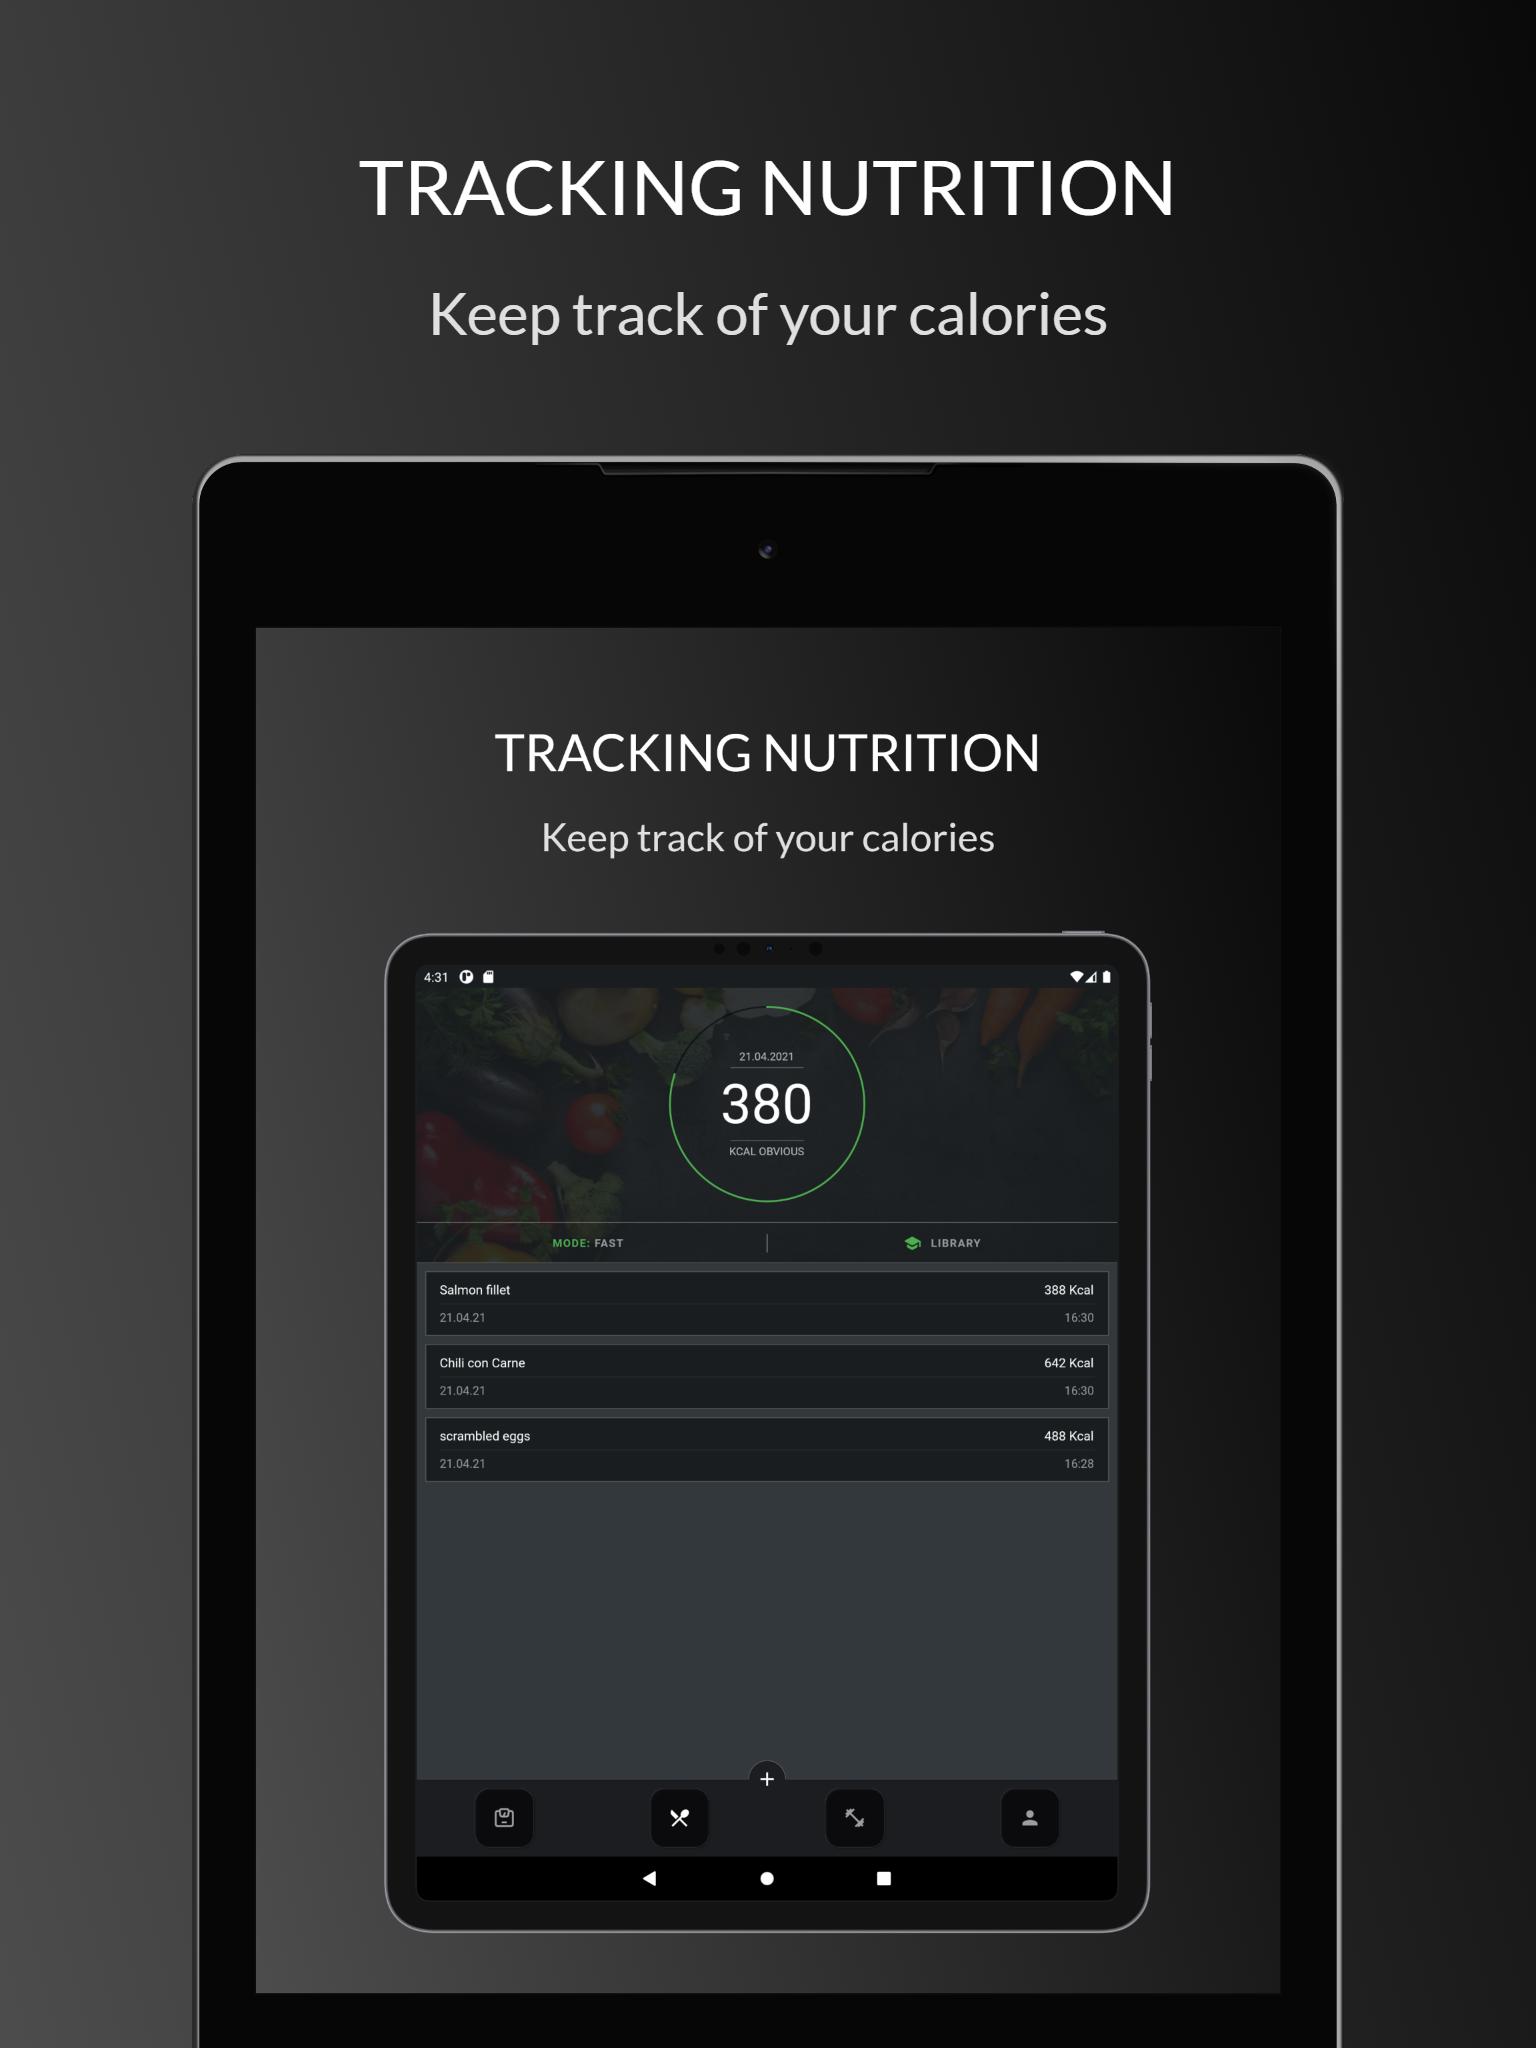 All in One Fitness - Weight Loss, Workouts & More 1.2.2 Screenshot 10